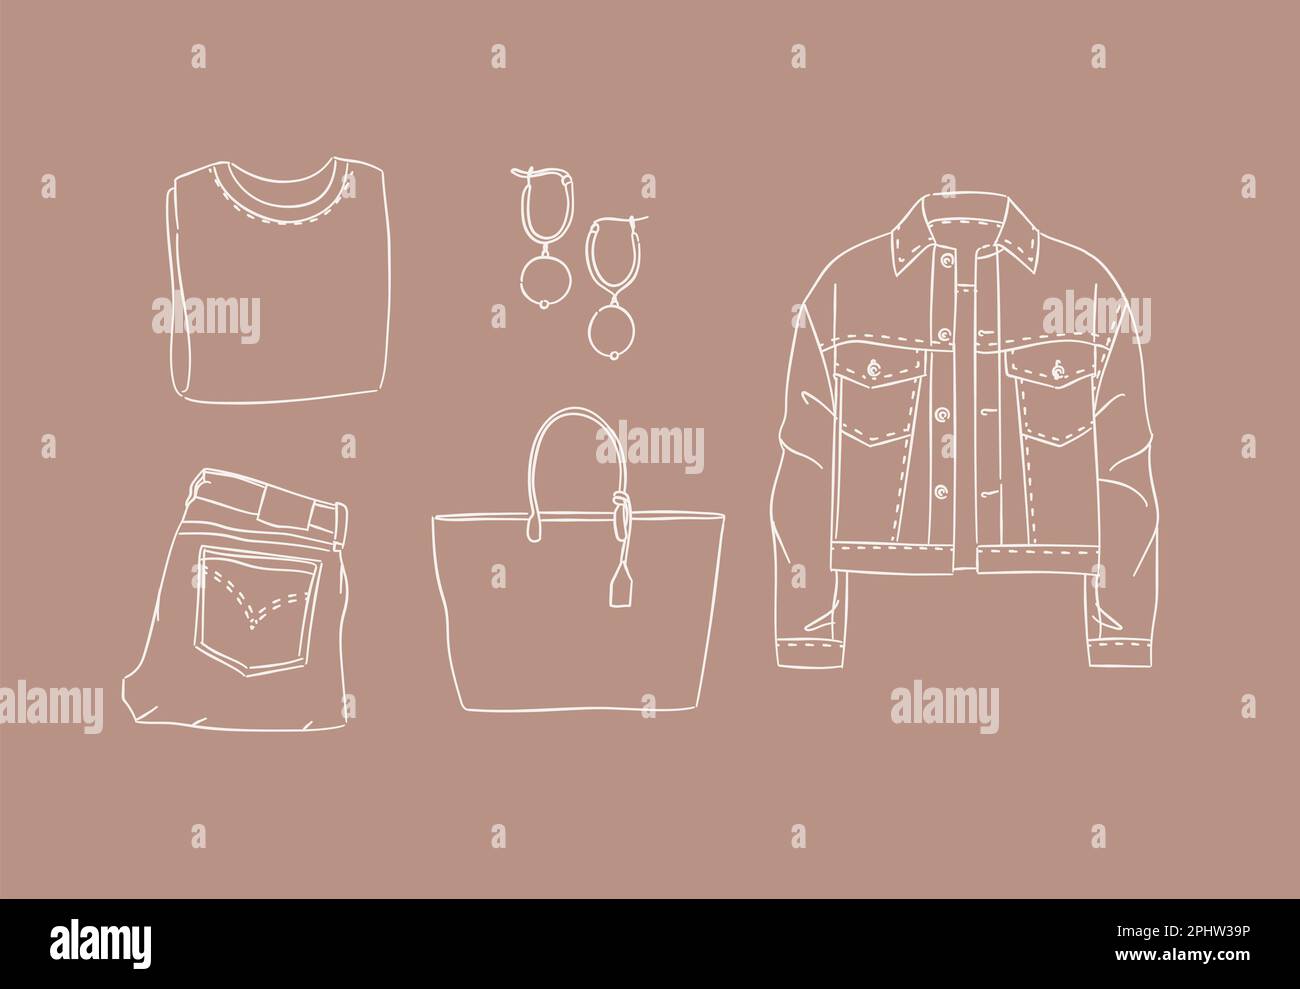 Set of clothes blouse, earrings, pants, jeans, bag, jacket for woman modern spring look in handdrawing style on brown background. Stock Vector